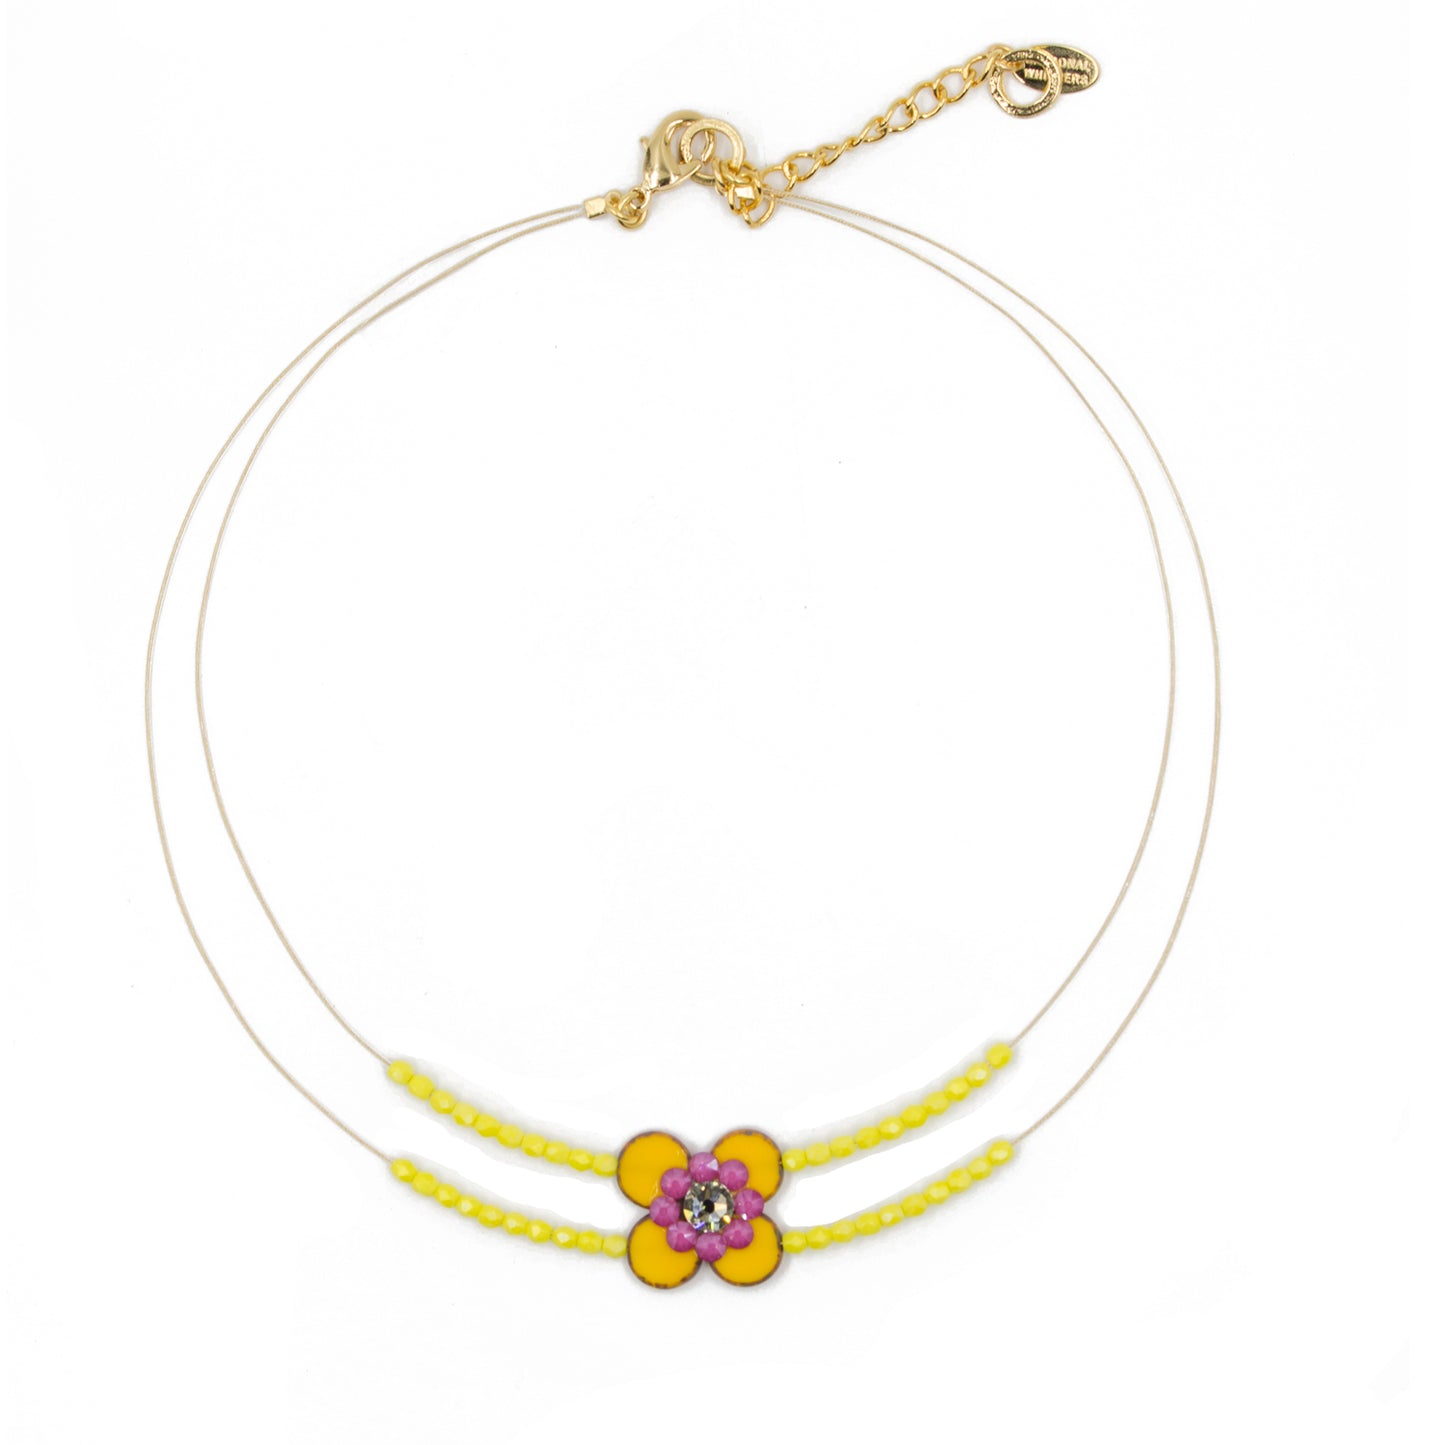 Flower Design Necklace 8487: Yellow/ Yellow/ Gold